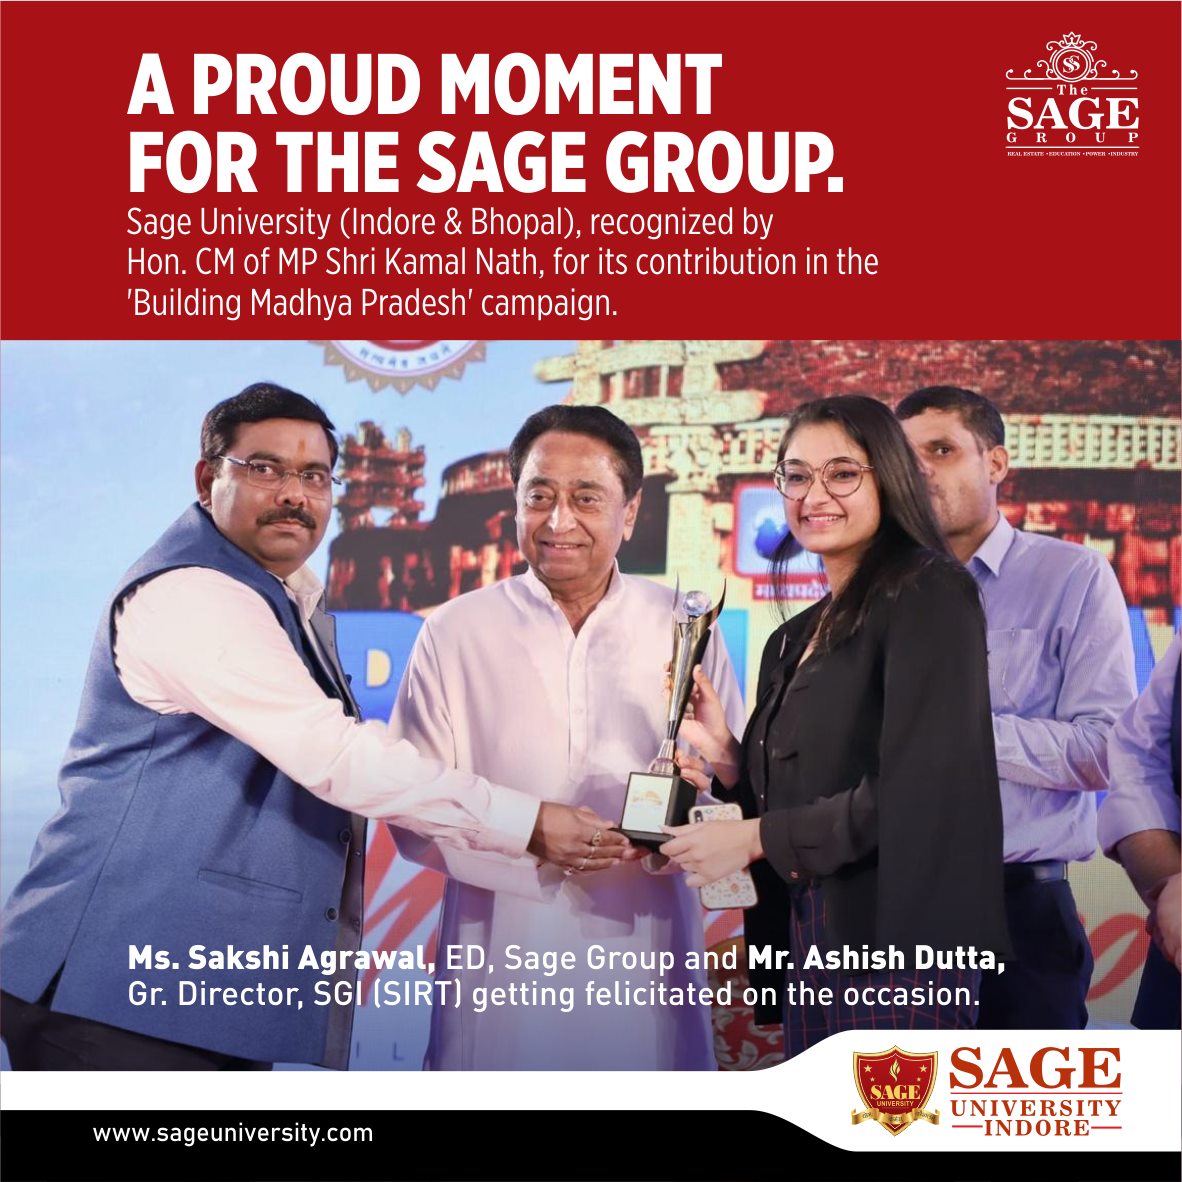 Sage University (Indore & Bhopal), recognized by Hon. CM of MP Shri Kamal Nath, for its contribution in the 'Building Madhya Pradesh' campaign.